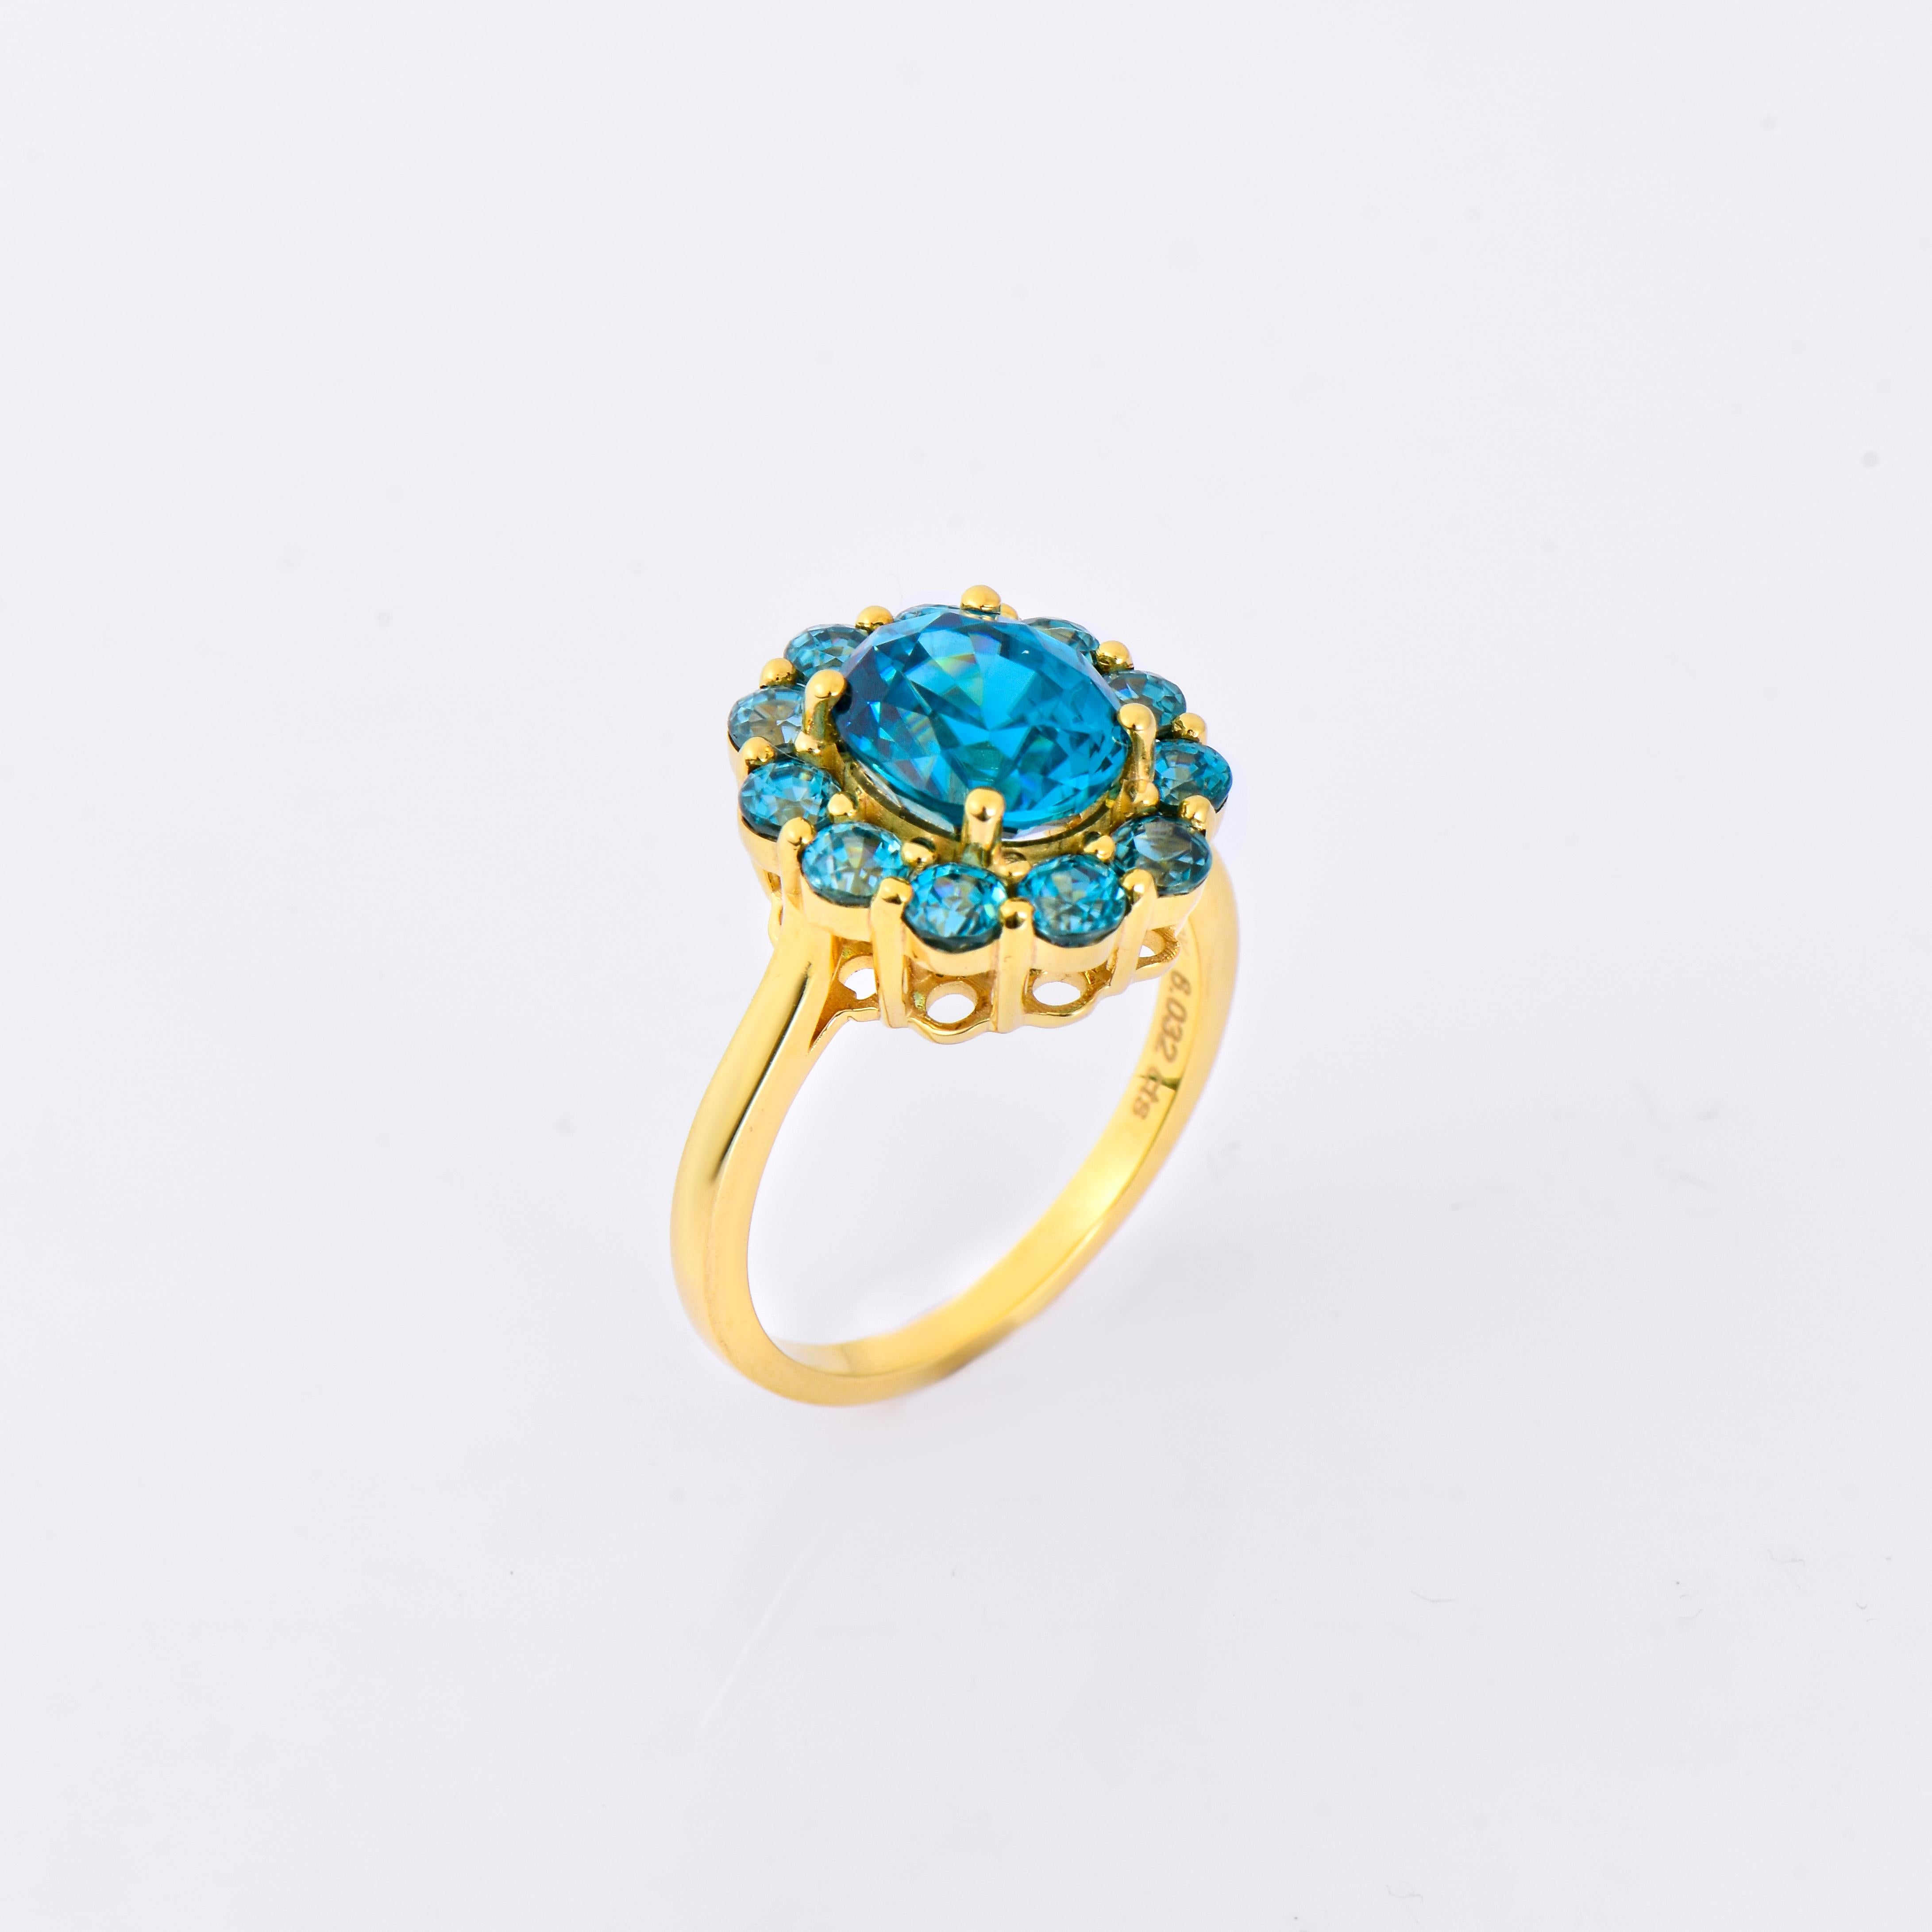 Orloff of Denmark; 10 Karat Gold Ring set with 12 Natural Cambodian Blue Zircons totaling to 6 carats.

This exquisite piece is a 10-karat gold ring, gracefully set with radiant Cambodian blue zircons that exude luxury and elegance. The central